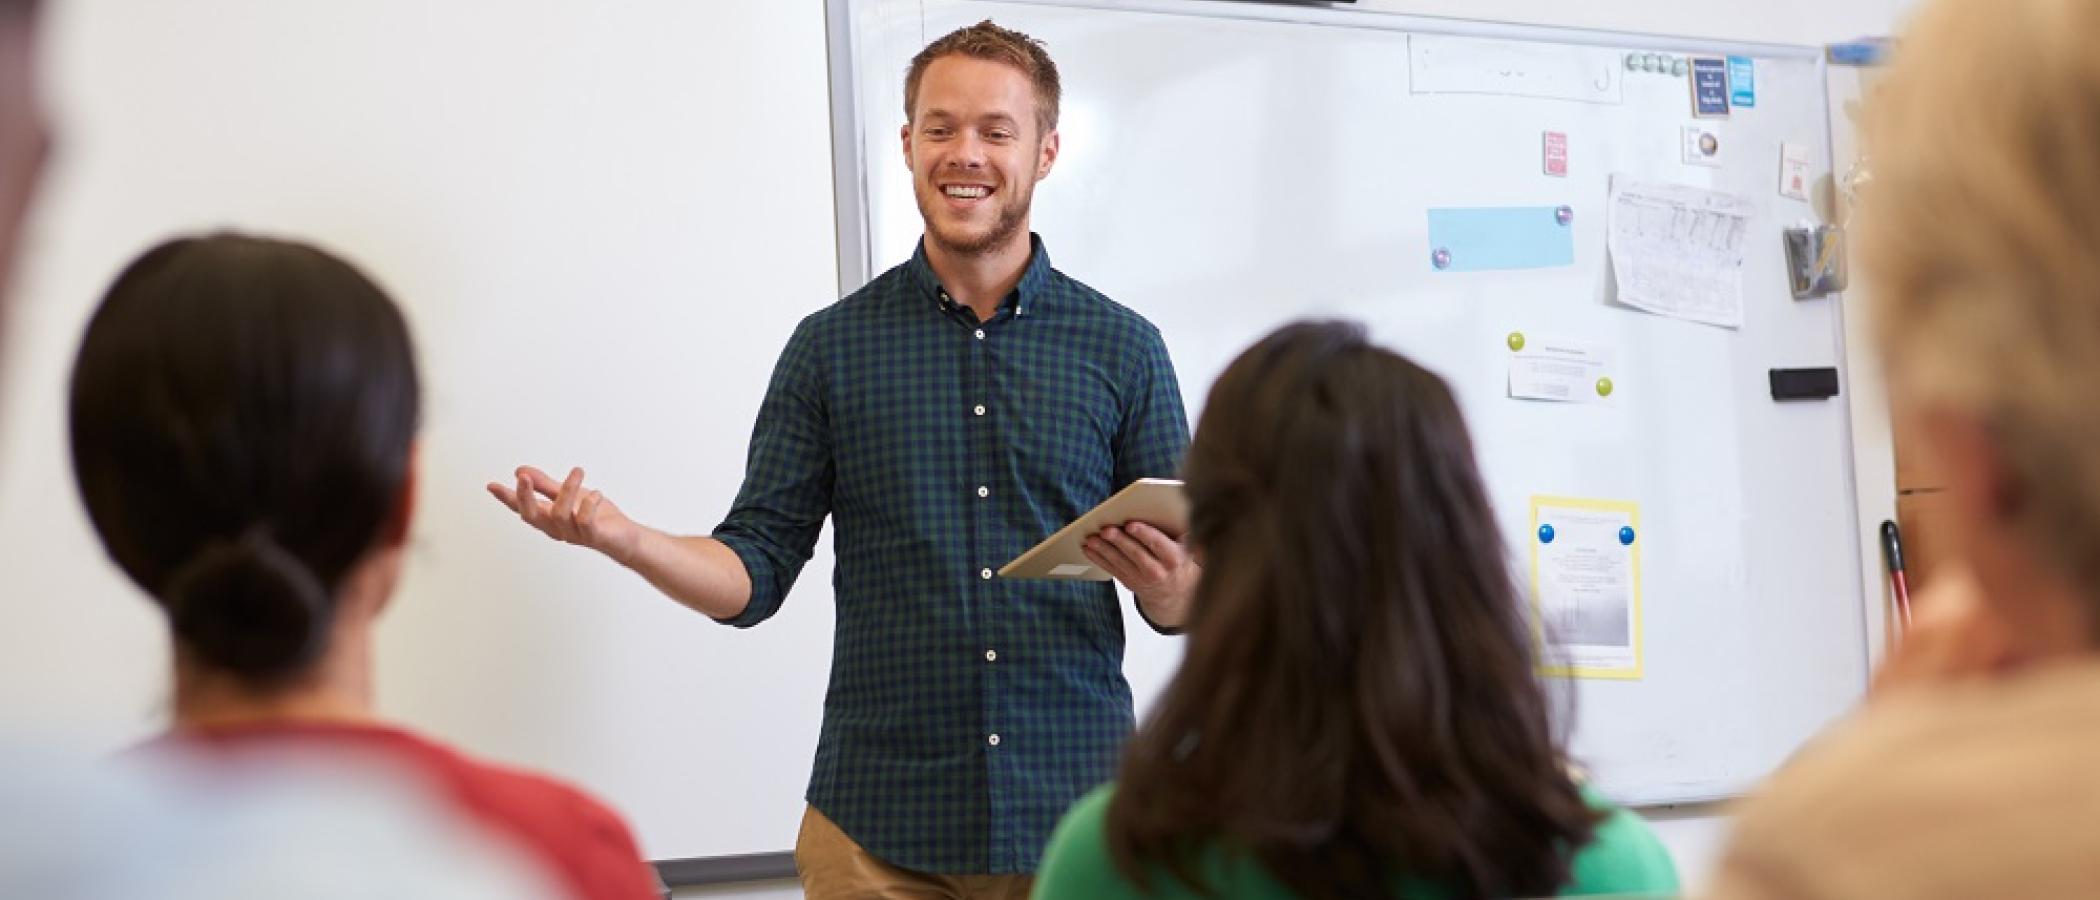  A male teacher standing in front of adult learners in a classroom